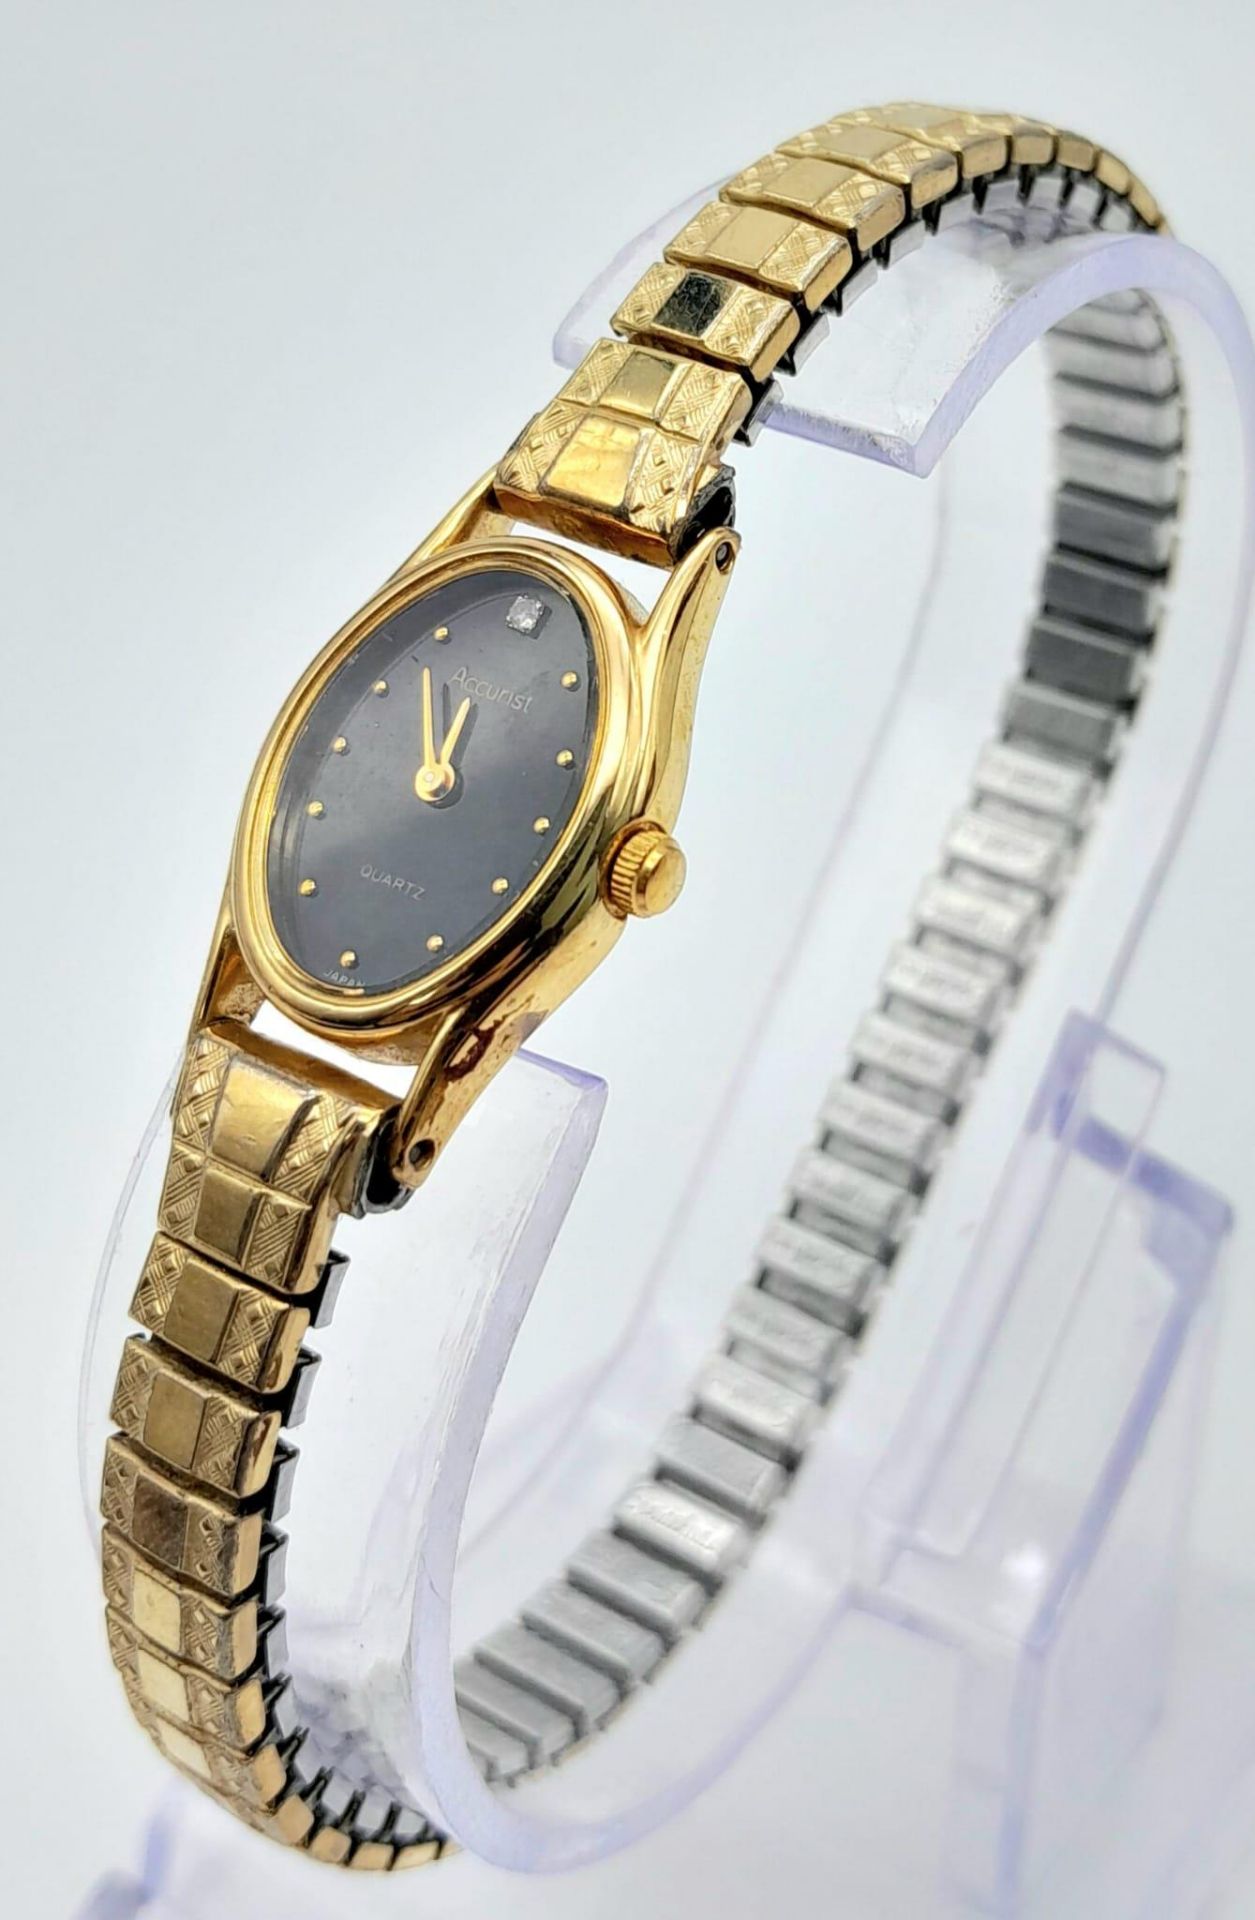 A Vintage Accurist Quartz Ladies Gold Tone Watch. Stainless steel strap and case - 10mm. Black dial. - Image 3 of 15